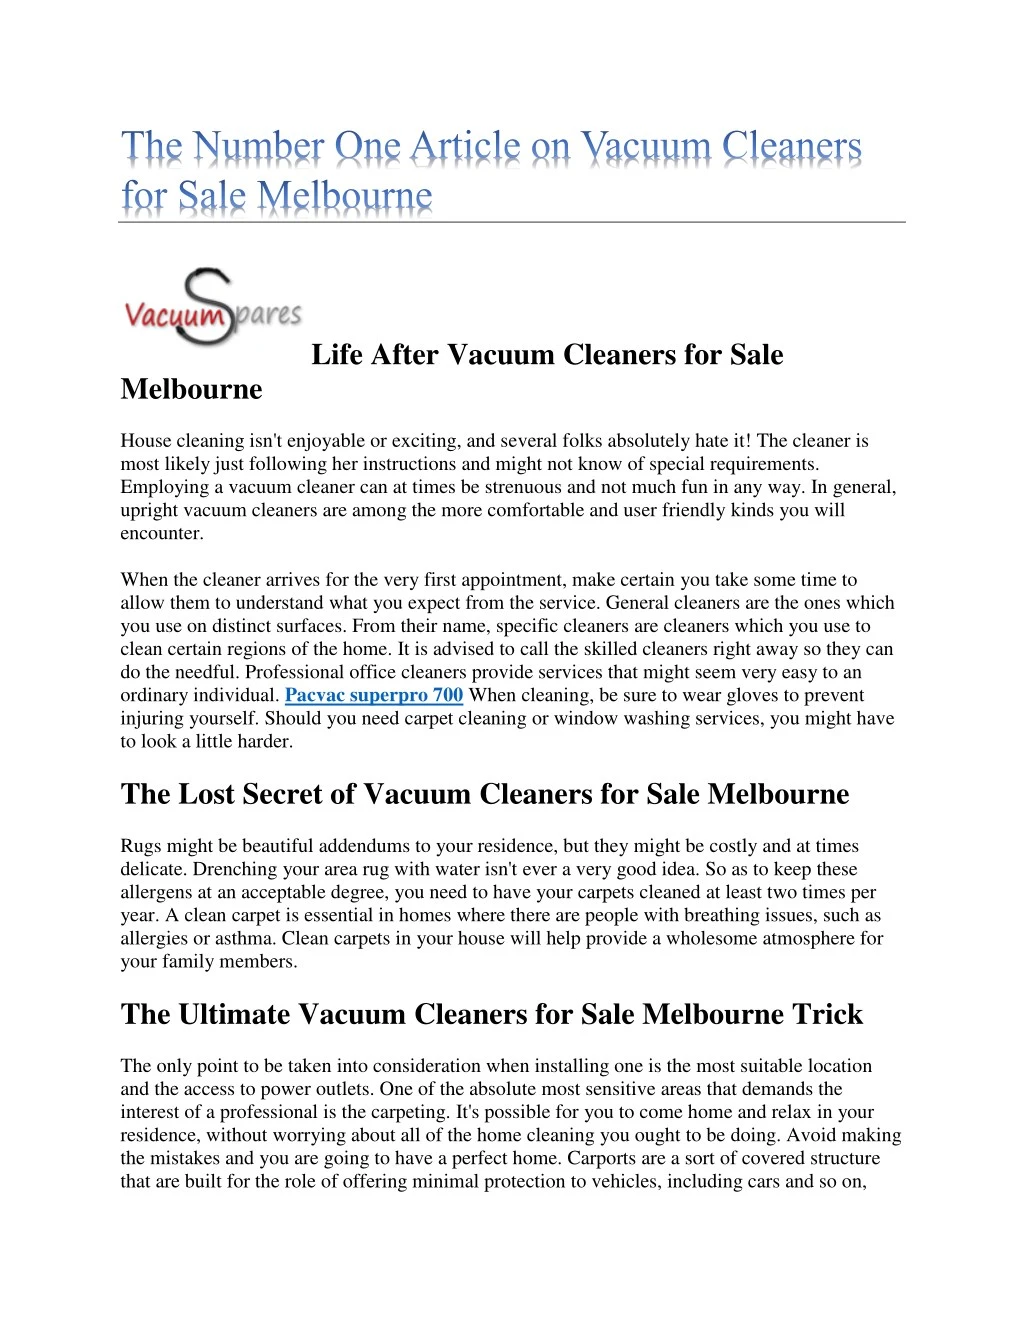 life after vacuum cleaners for sale